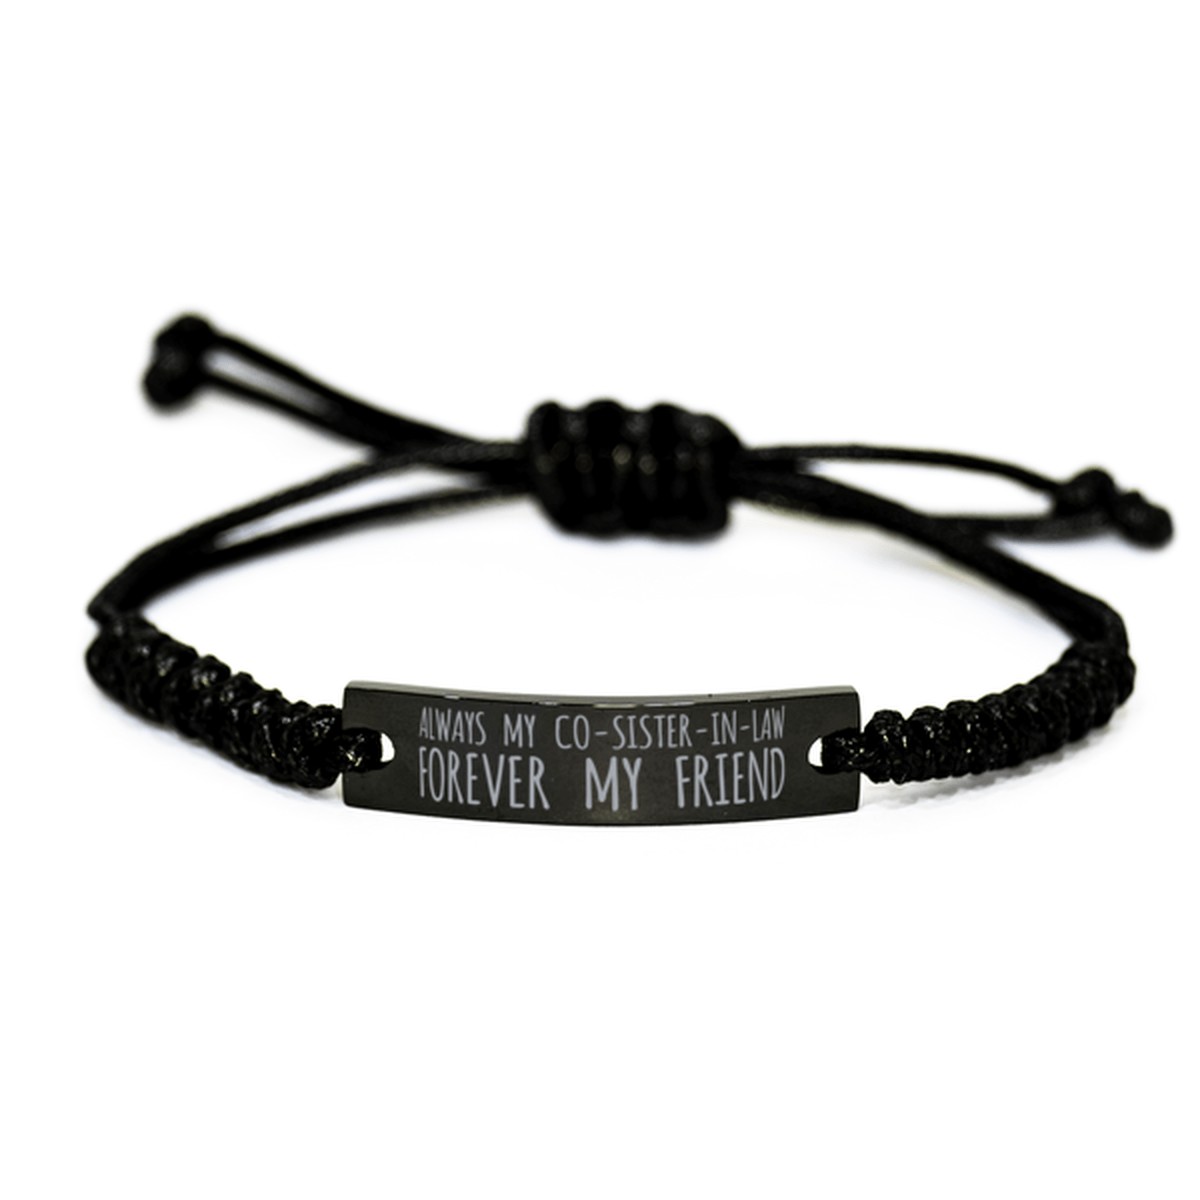 Inspirational Co-Sister-In-Law Black Rope Bracelet, Always My Co-Sister-In-Law Forever My Friend, Best Birthday Gifts For Family